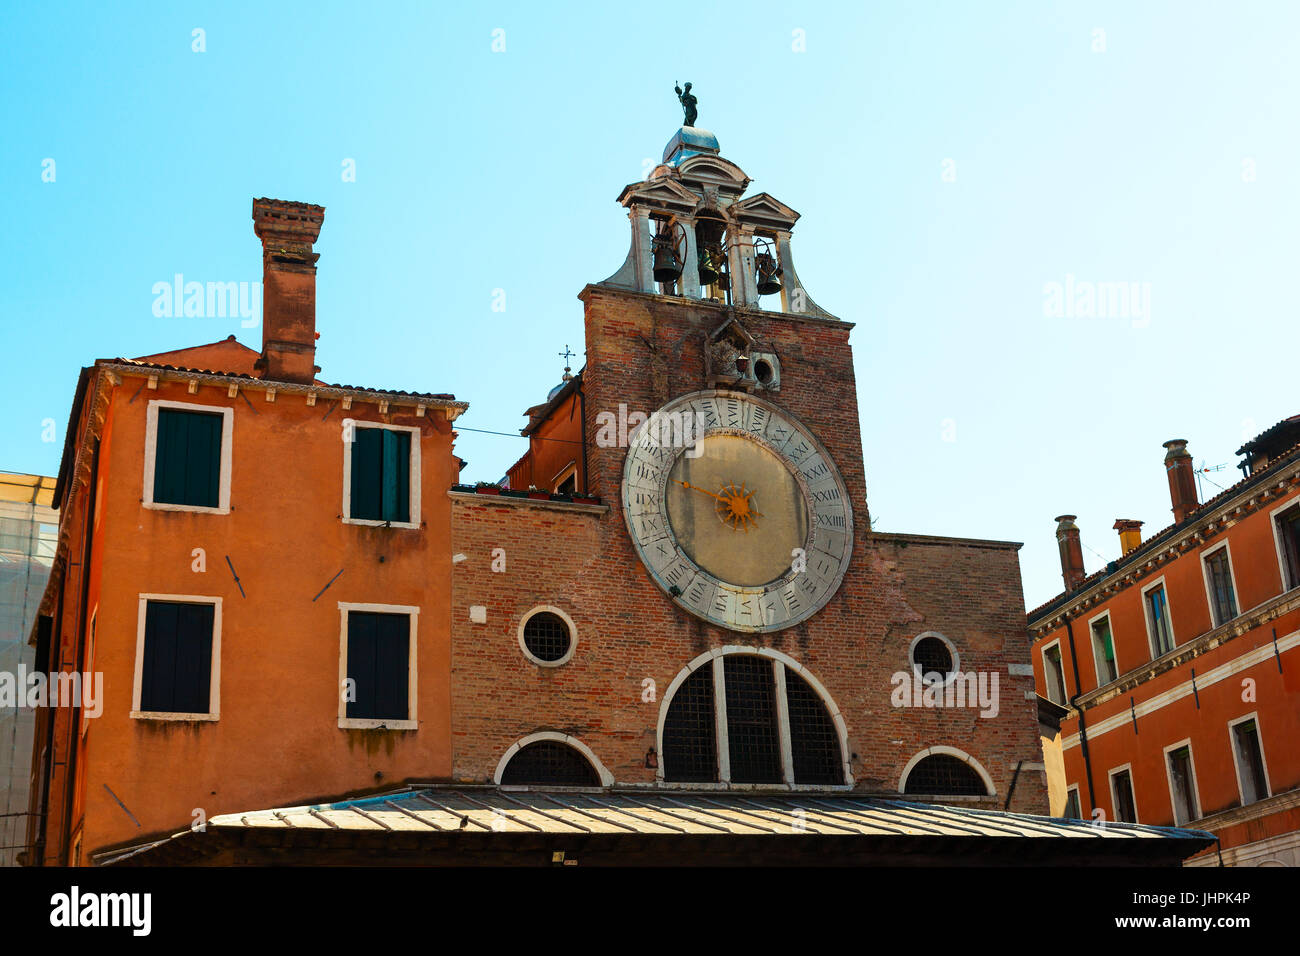 Bell Tower Of The Roman Catholic Church Of San Giovanni Elemosinario. Build  In Renaissance Architectural Style. View From Bridge Rialto. Venice, Italy  Stock Photo, Picture and Royalty Free Image. Image 37548061.